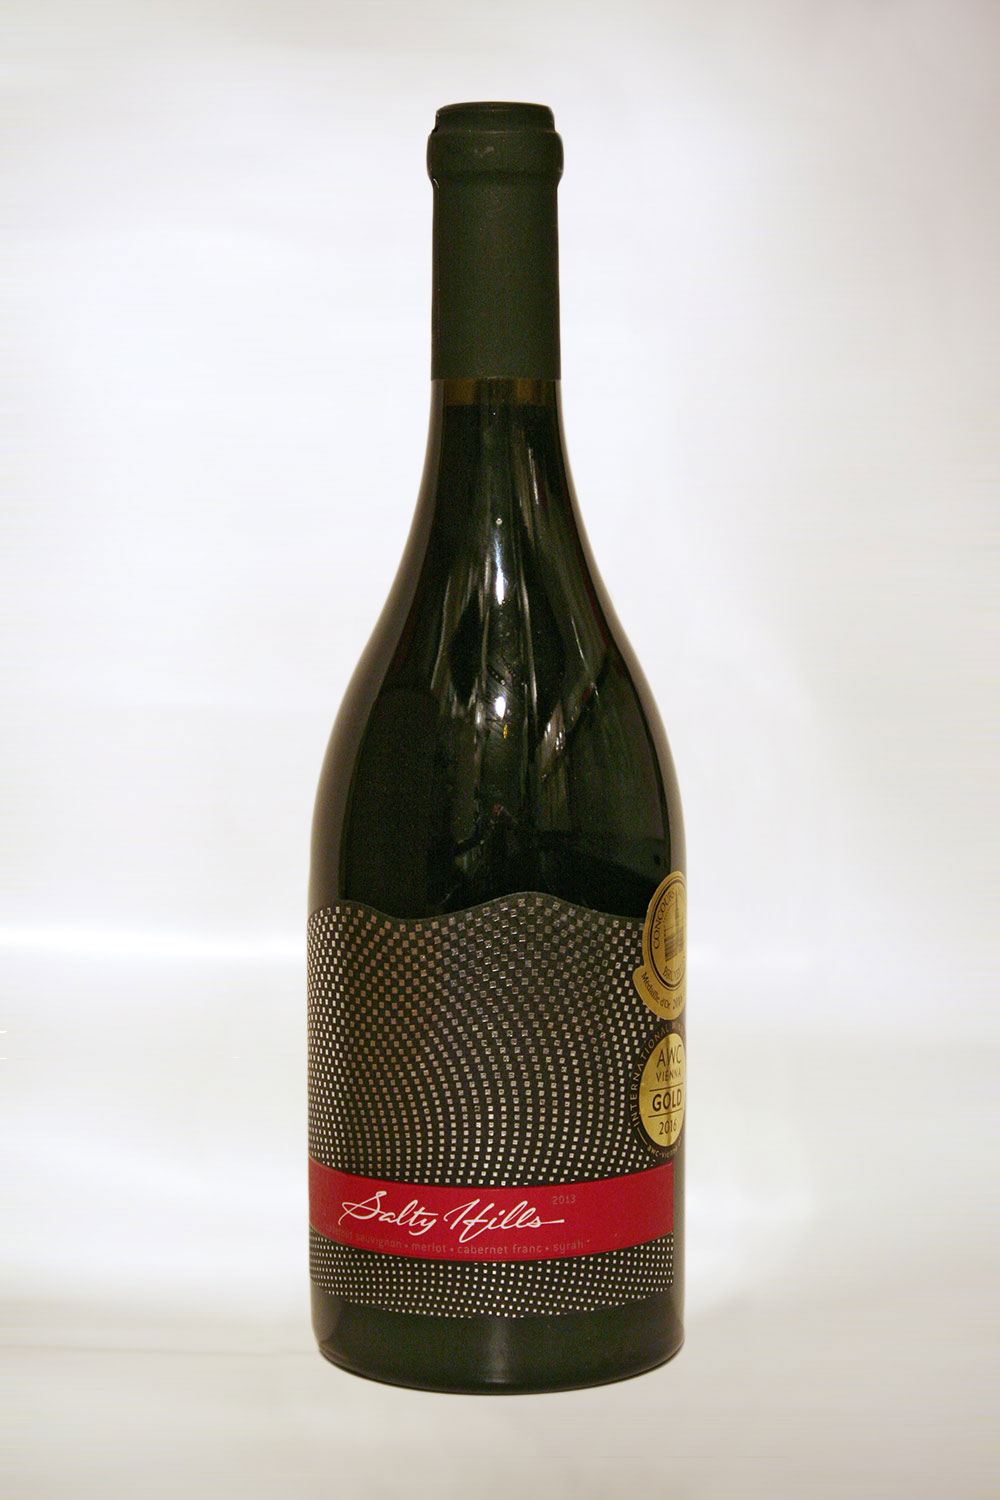 Salty Hills Red 2013